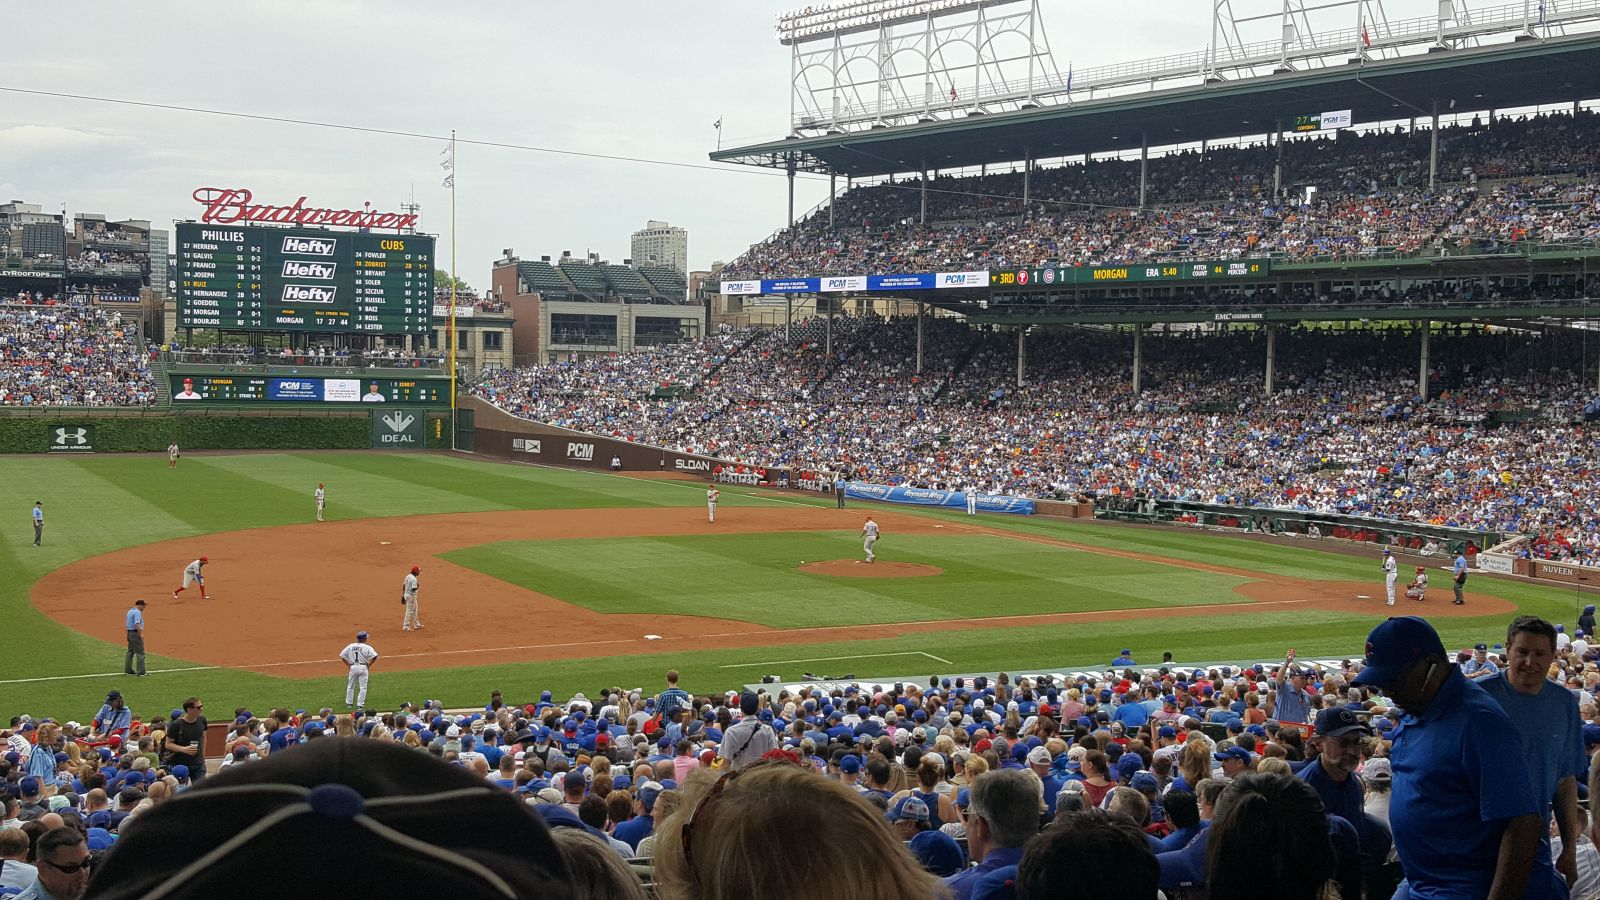 section 209, row 9 seat view  for baseball - wrigley field